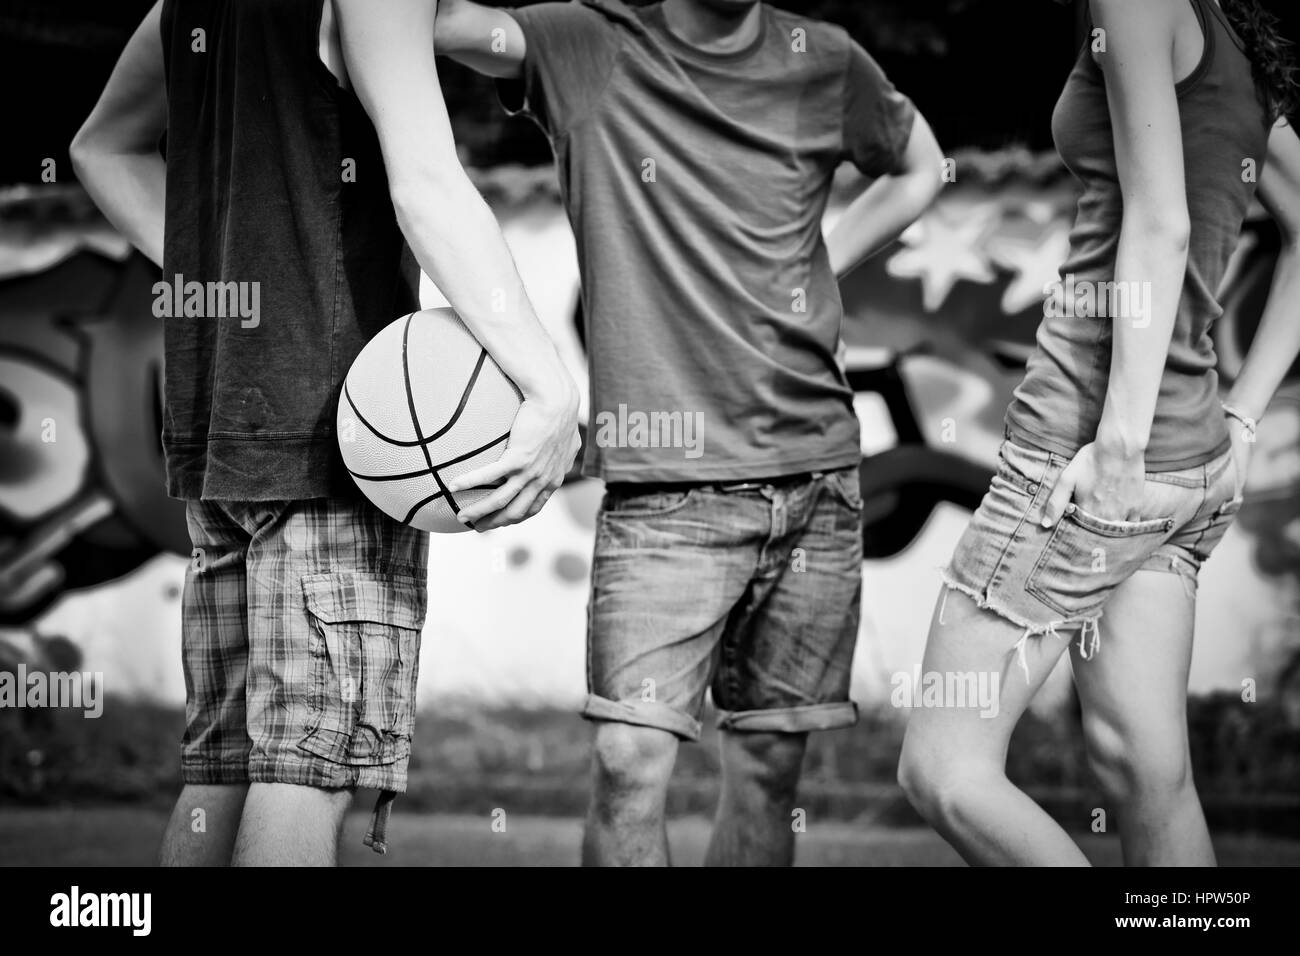 Group of friends talking and taking a break after playing basketball Stock Photo